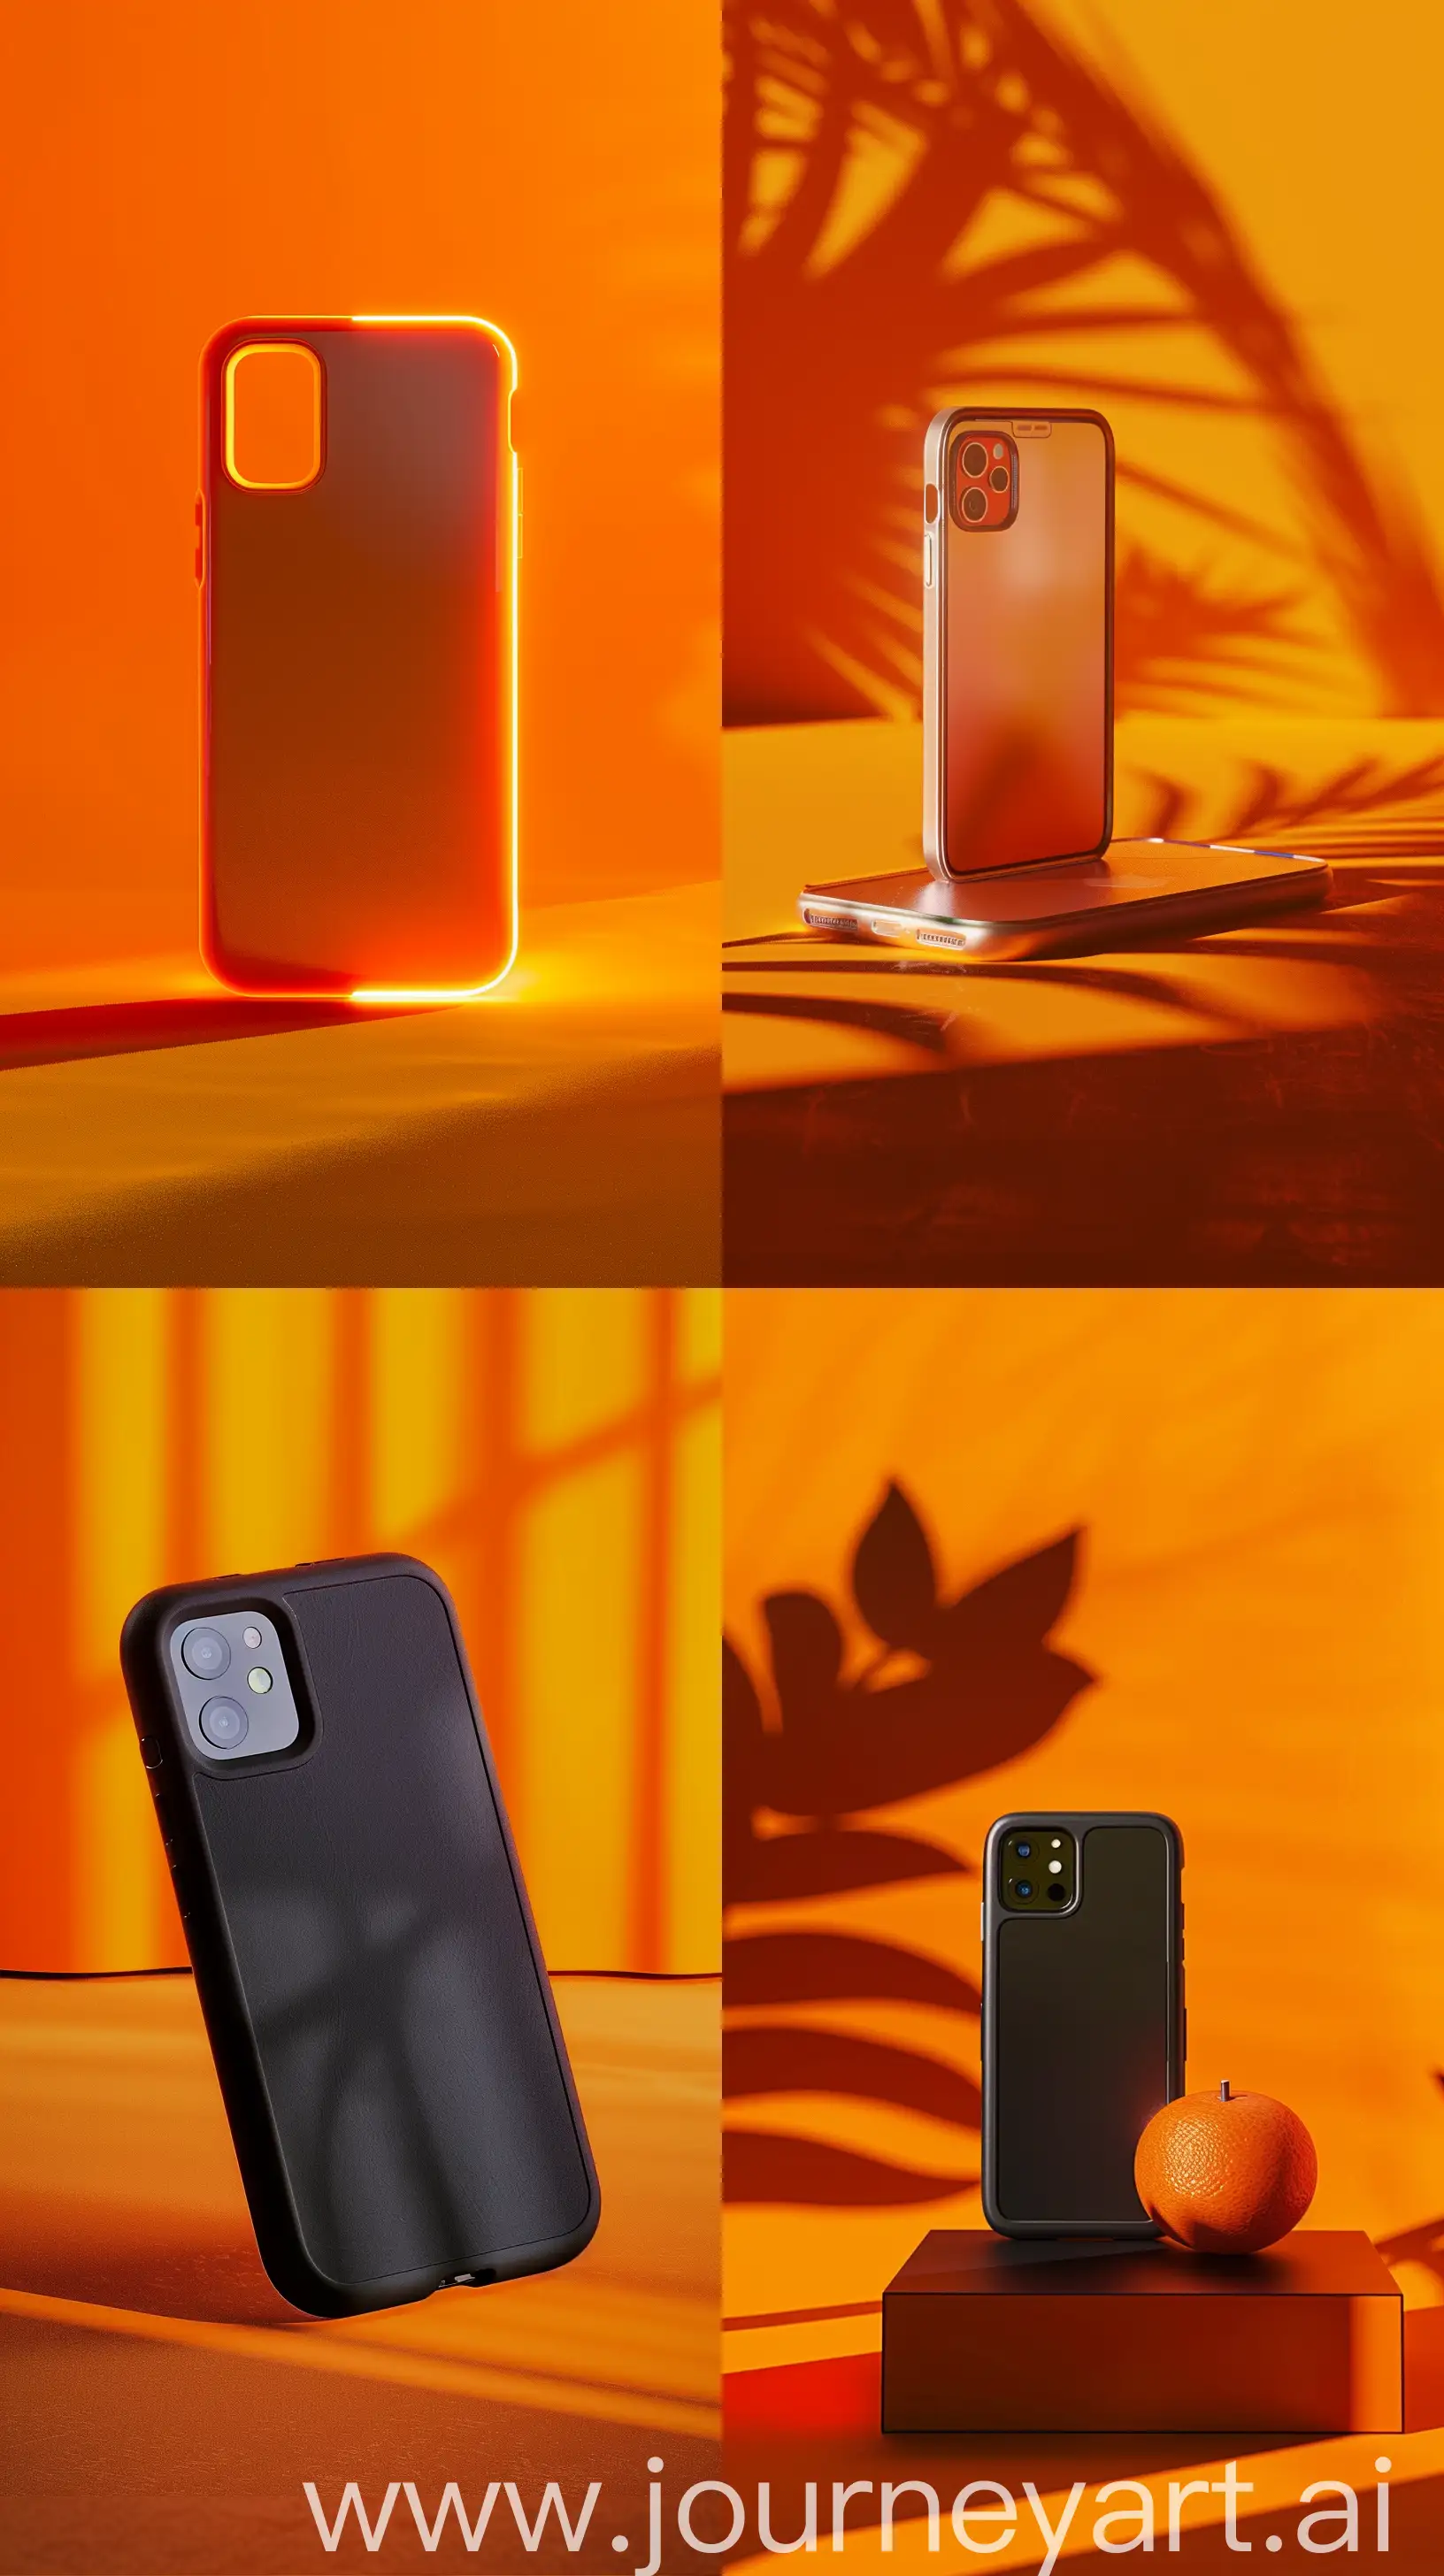 A cell phone on a case, LED Warm Lighting, Promotional Ambiance, C4D Realistic Style, Soft Shadows, Orange Tone Background, Shot with a Hasselblad Camera, ISO 100 Professional Color Grading, Still Life Photography, Commercial Photography, Premium --ar 9:16